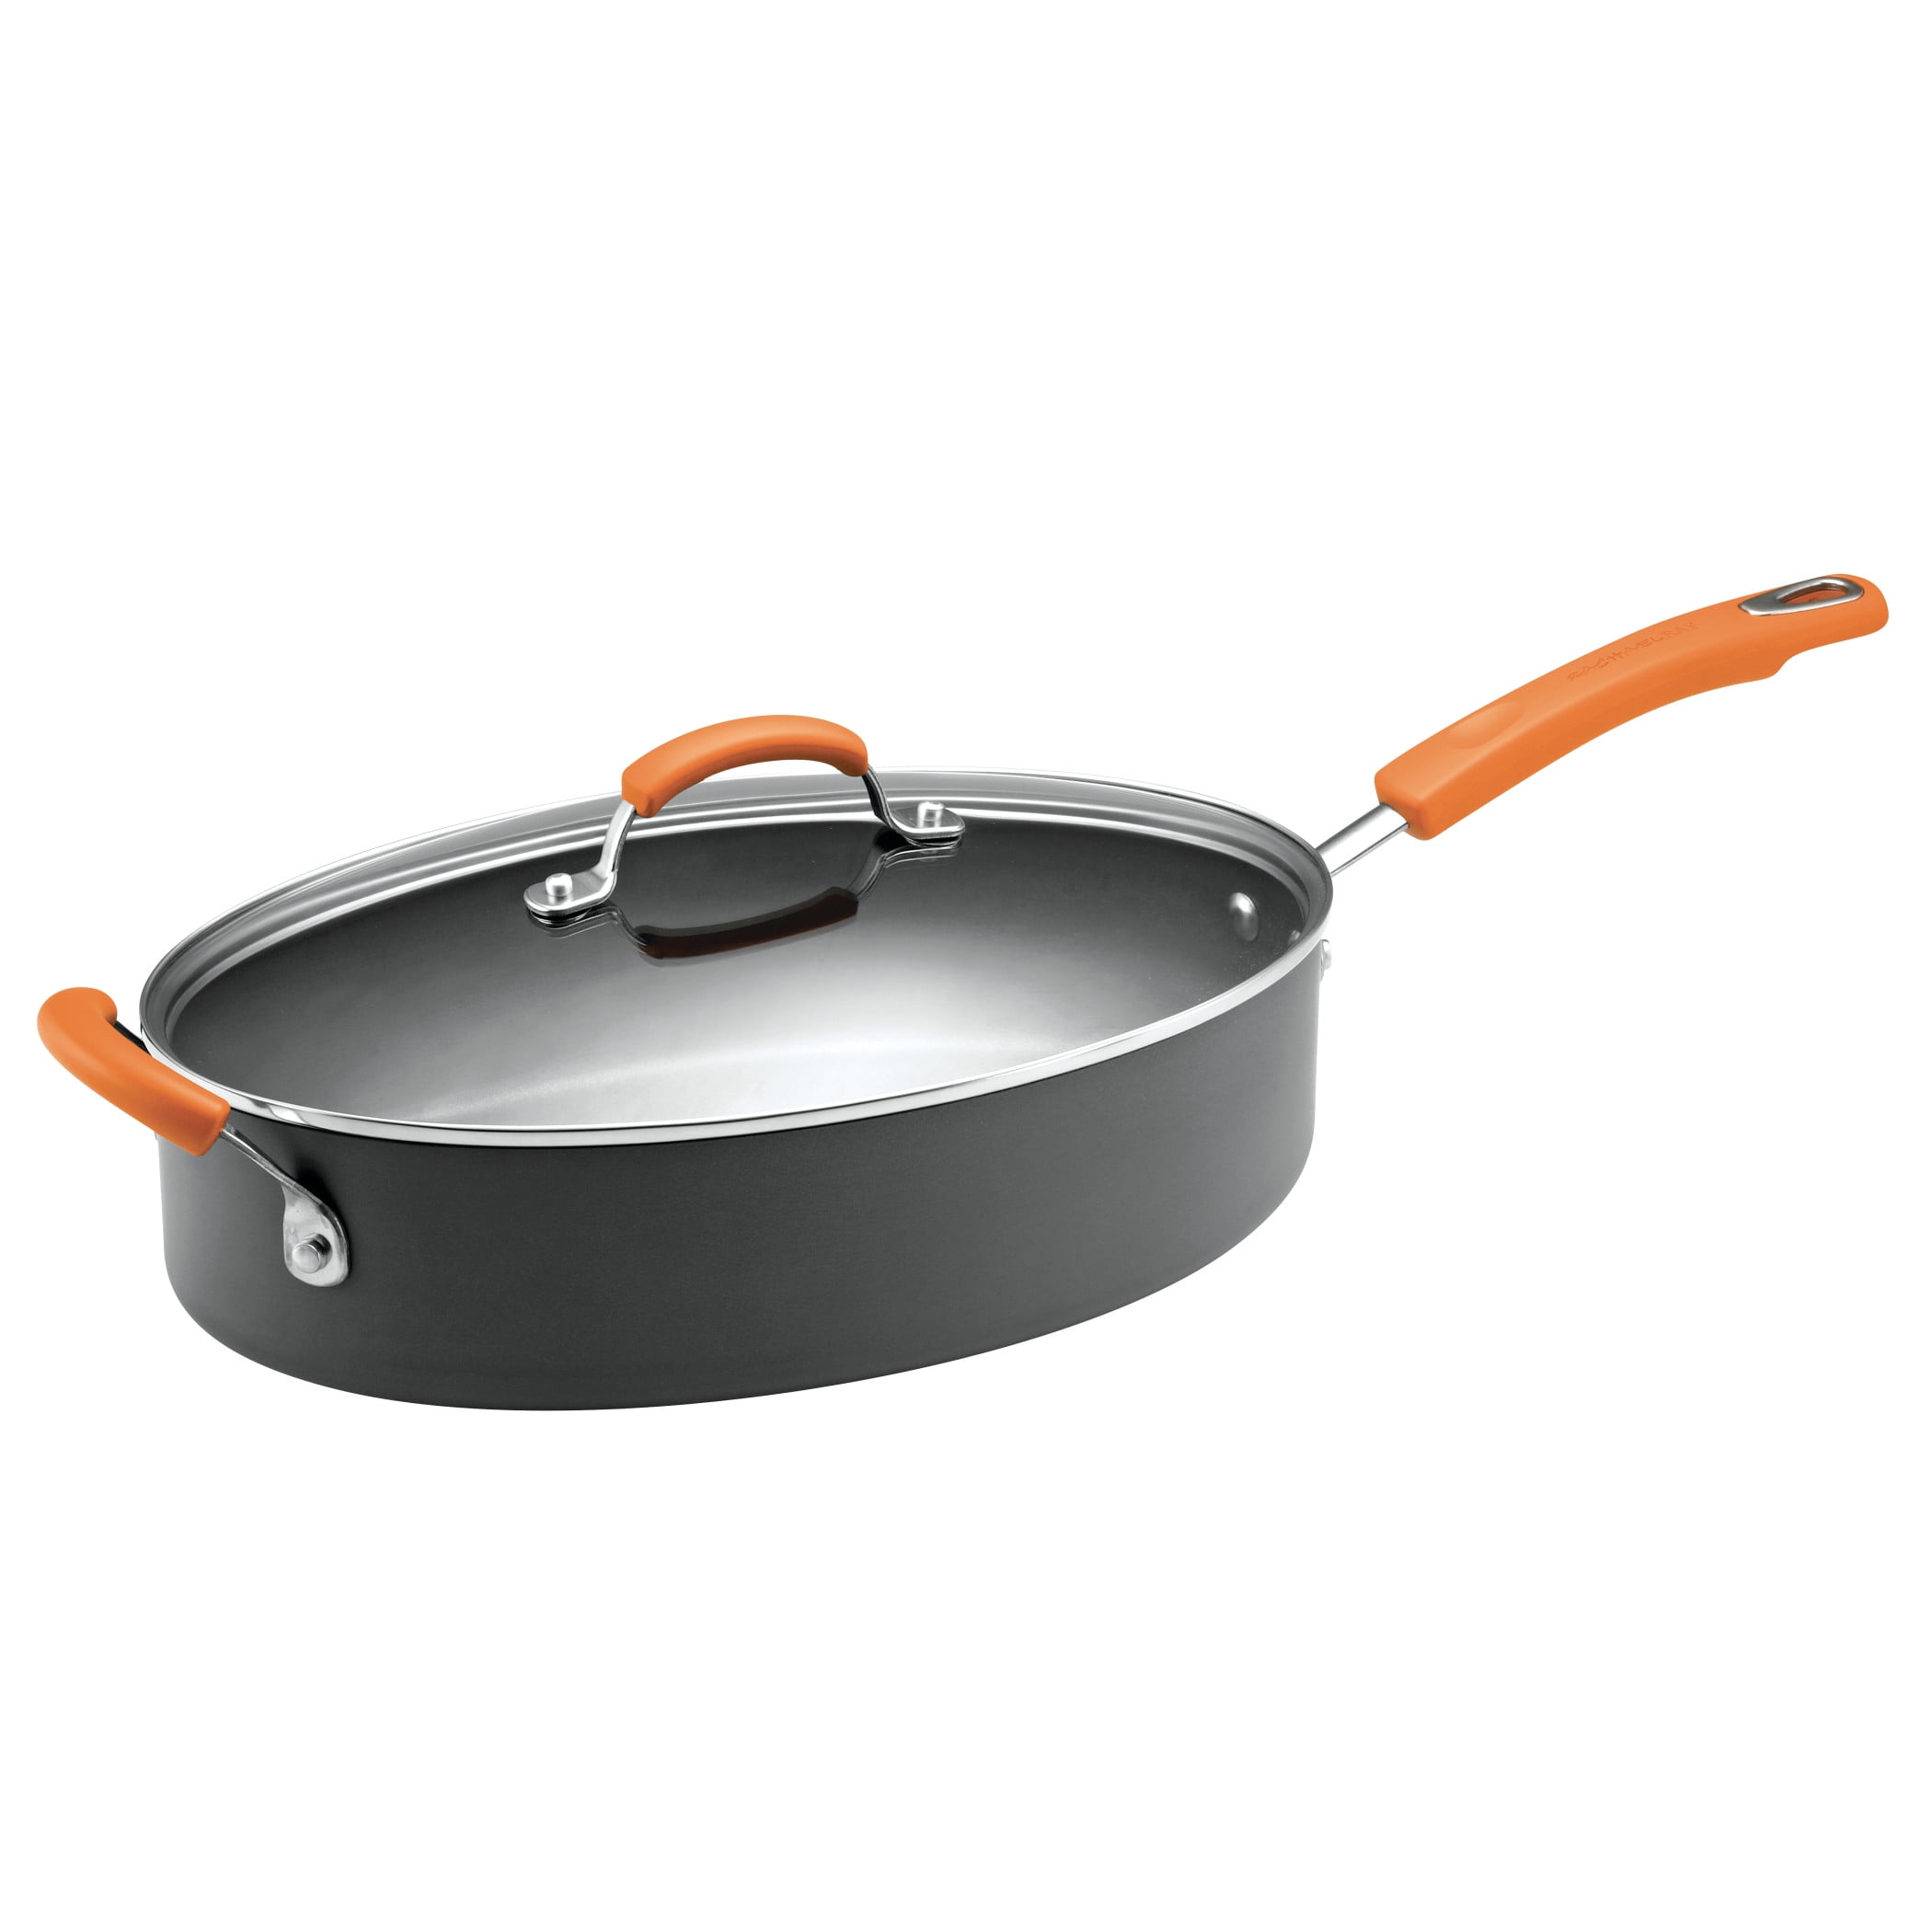 Rachael Ray 14-Inch Cucina Hard-Anodized Nonstick Skillet with 